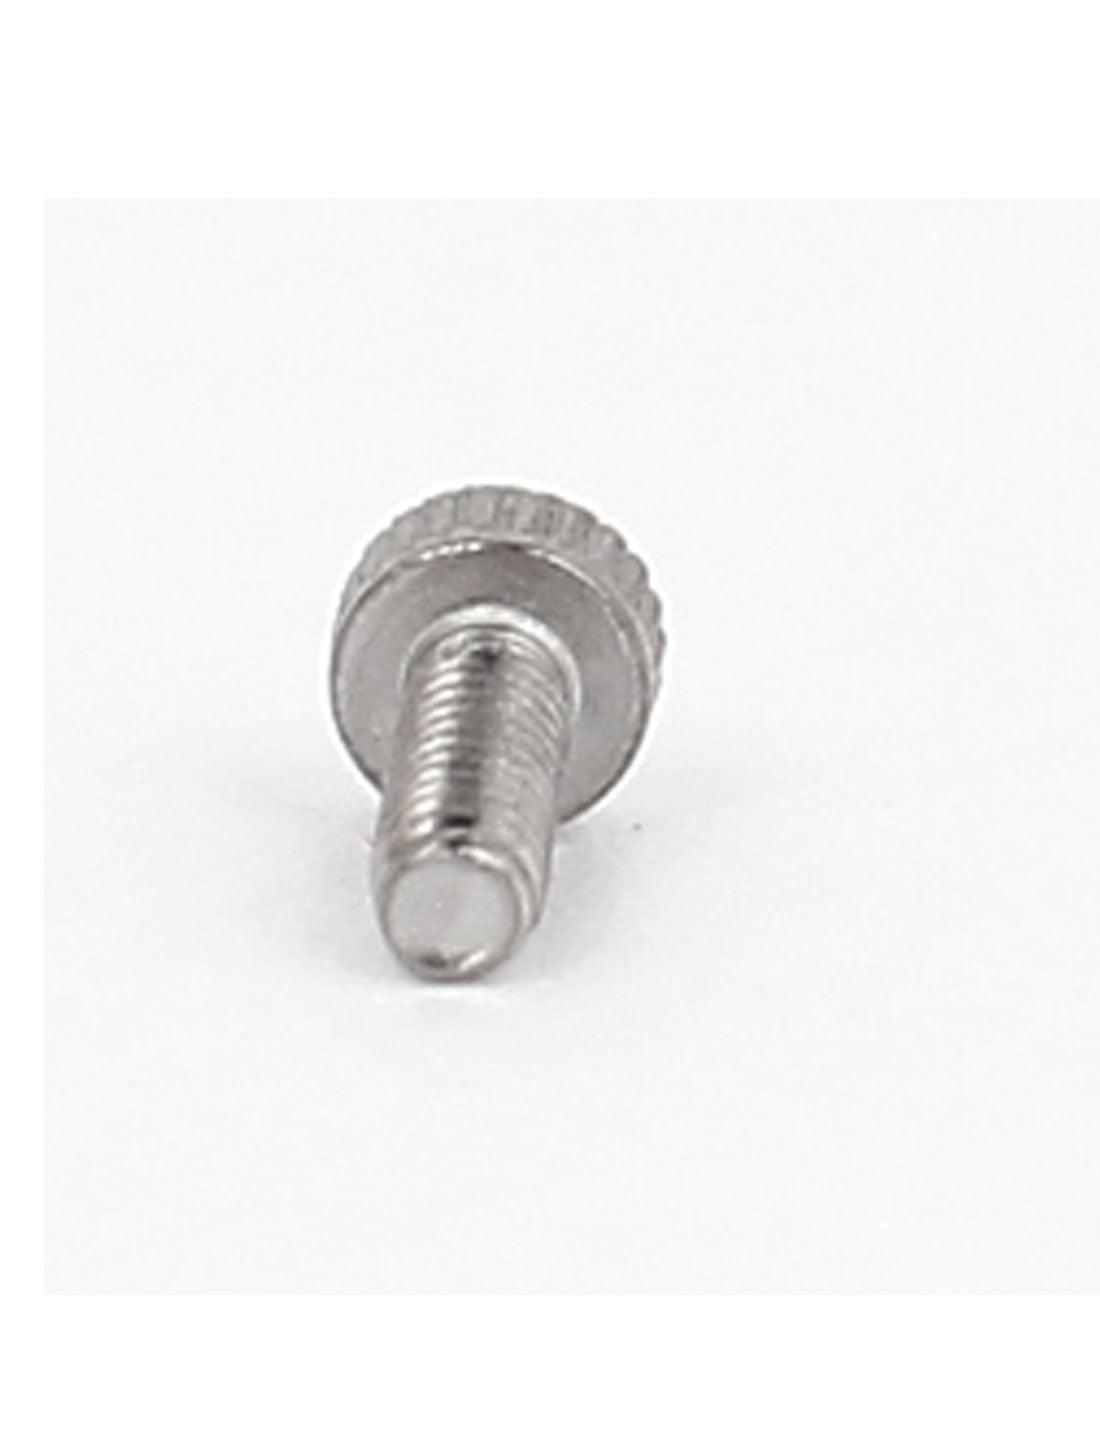 uxcell Uxcell 100pcs 6mm Long M1.6x5mm Stainless Steel Hex Socket Head Cap Screws 0.35mm Pitch